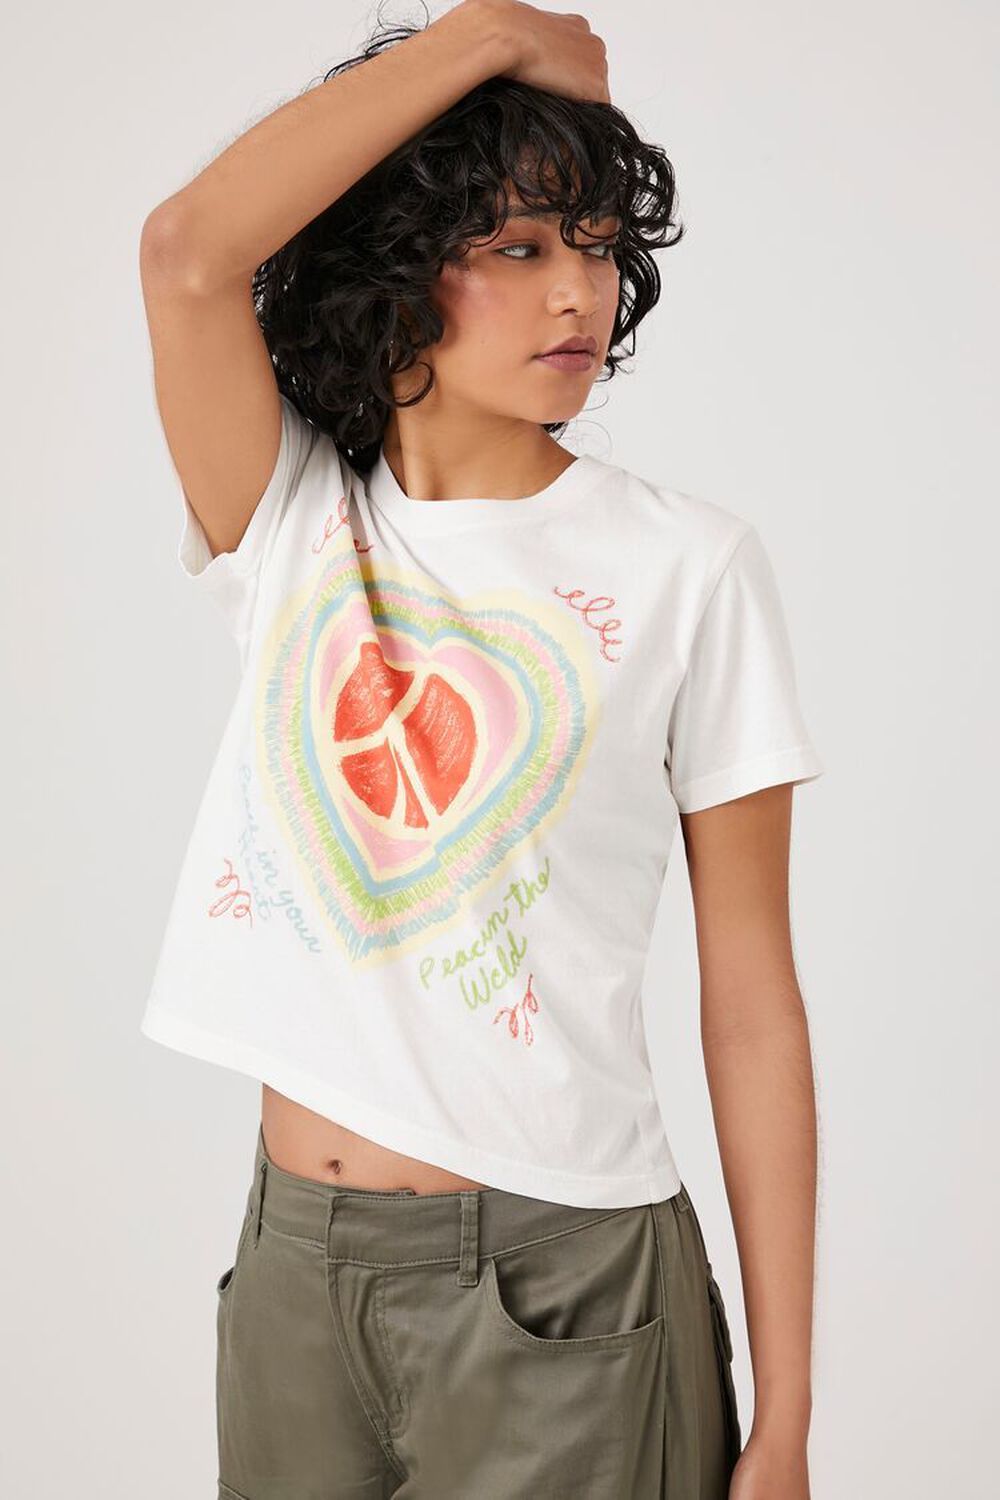 Doodle Heart Peace Sign Baby Tee